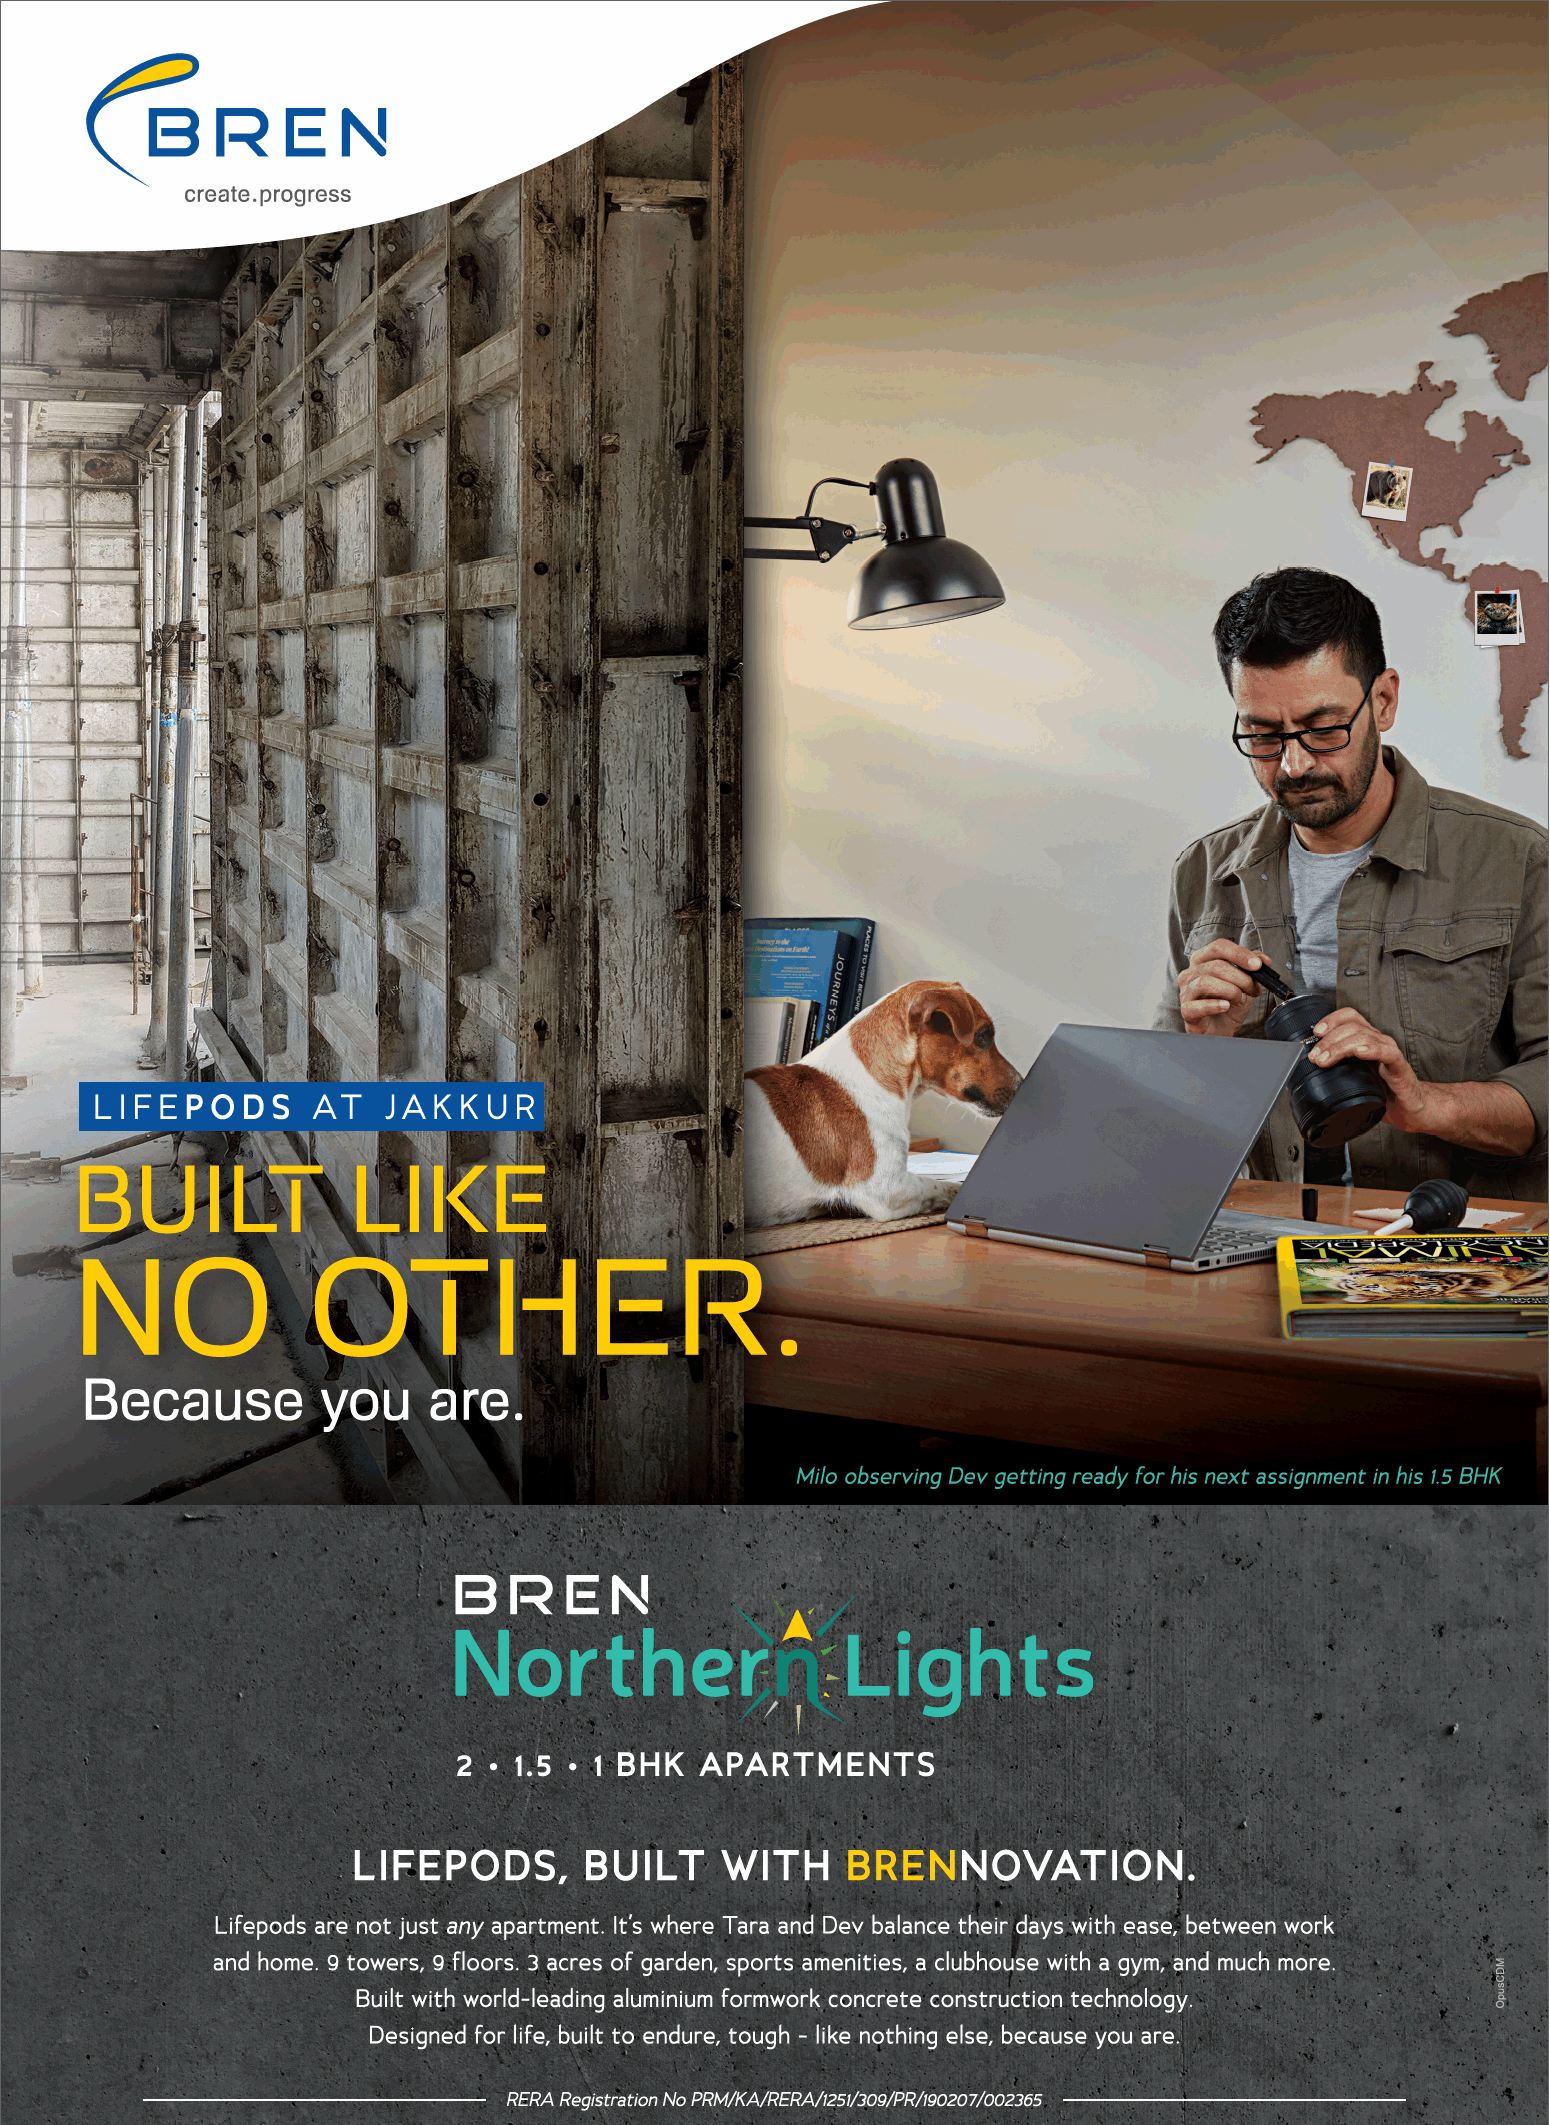 Bren presents 2, 1.5, 1 bhk apartments at Northern Lights in Bangalore Update